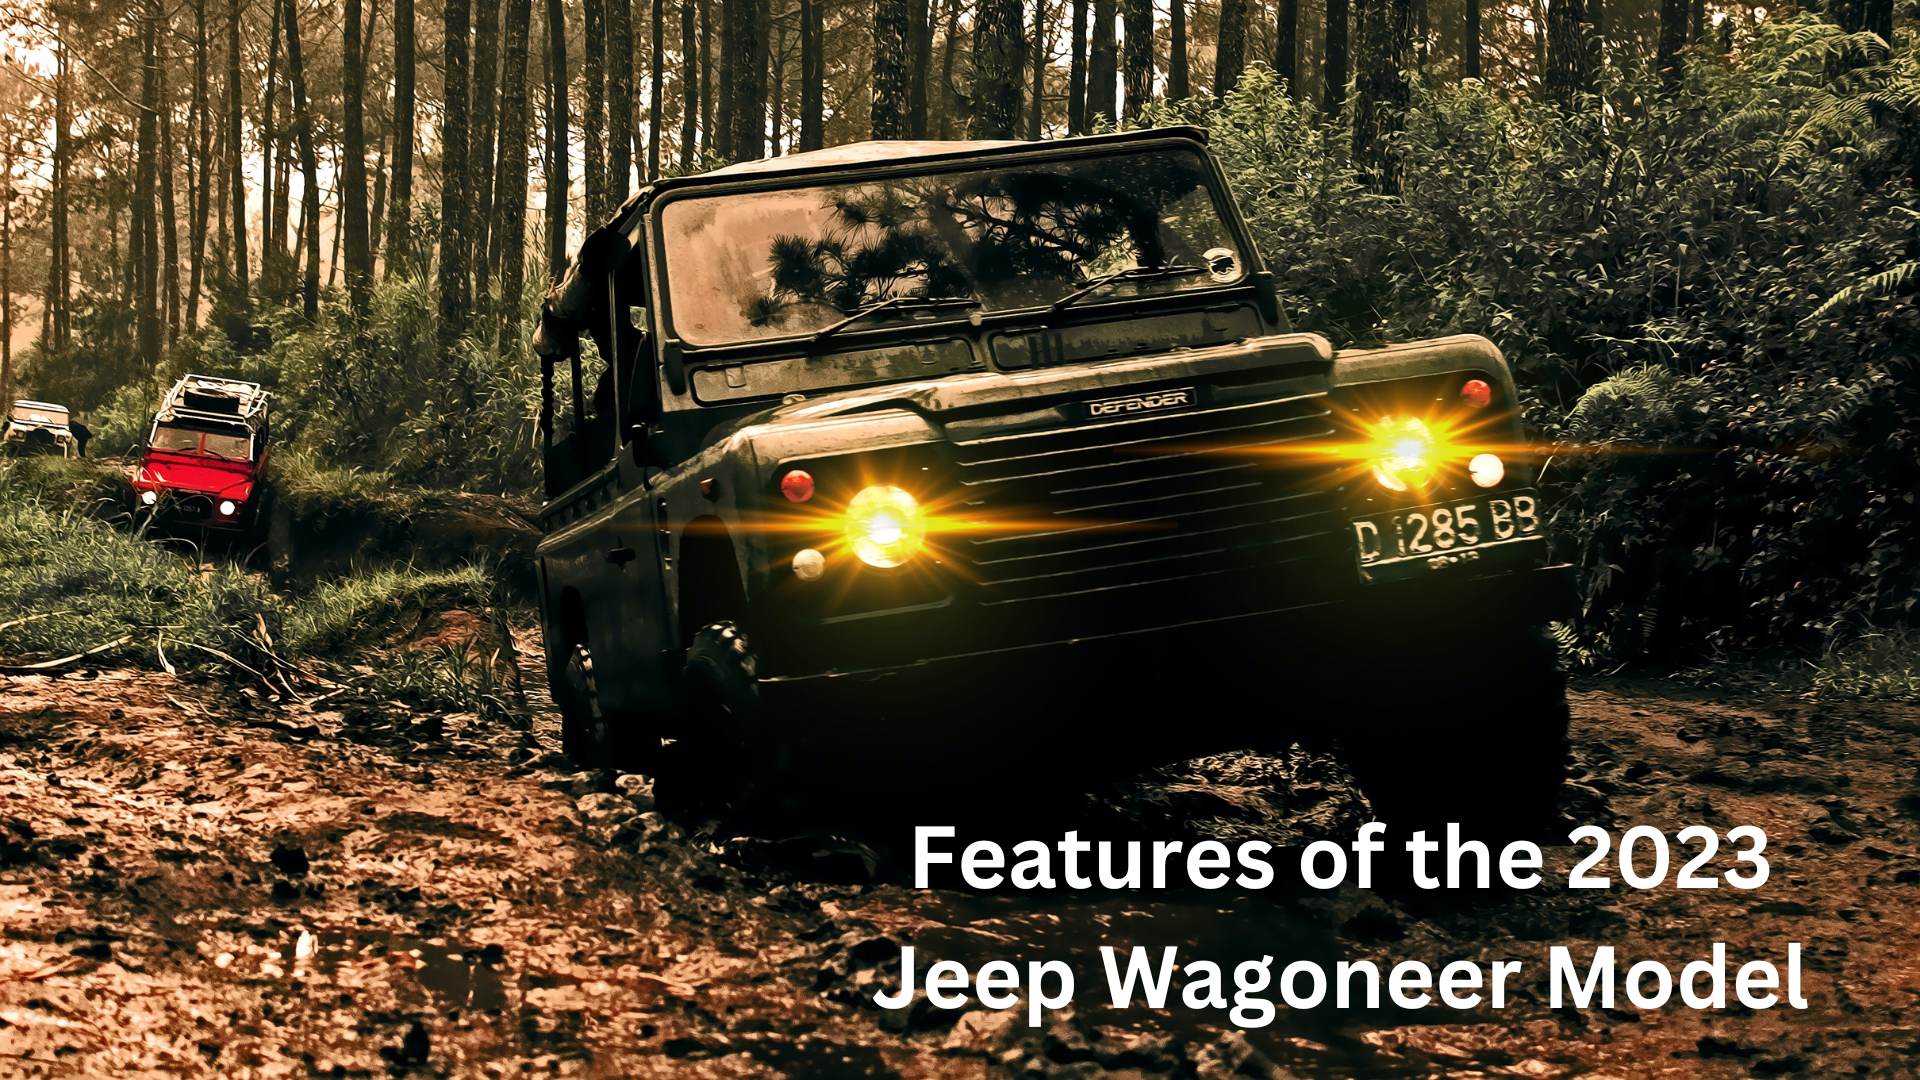 Features of the 2023 Jeep Wagoneer Model